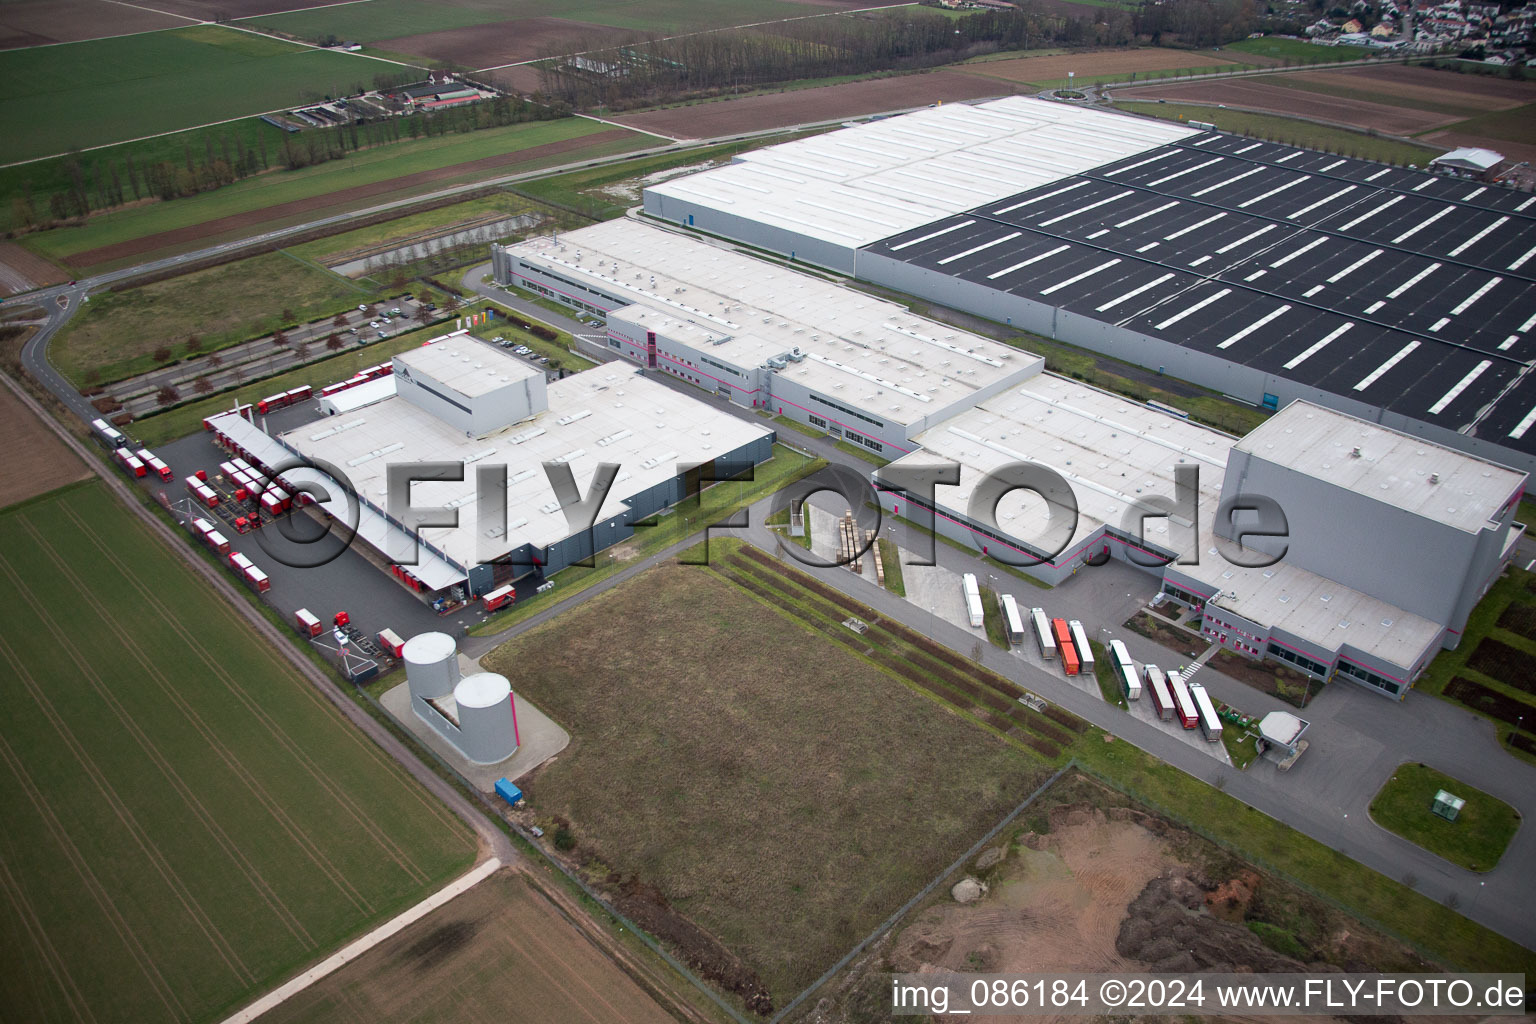 Industrial Estate in Offenbach an der Queich in the state Rhineland-Palatinate, Germany from above